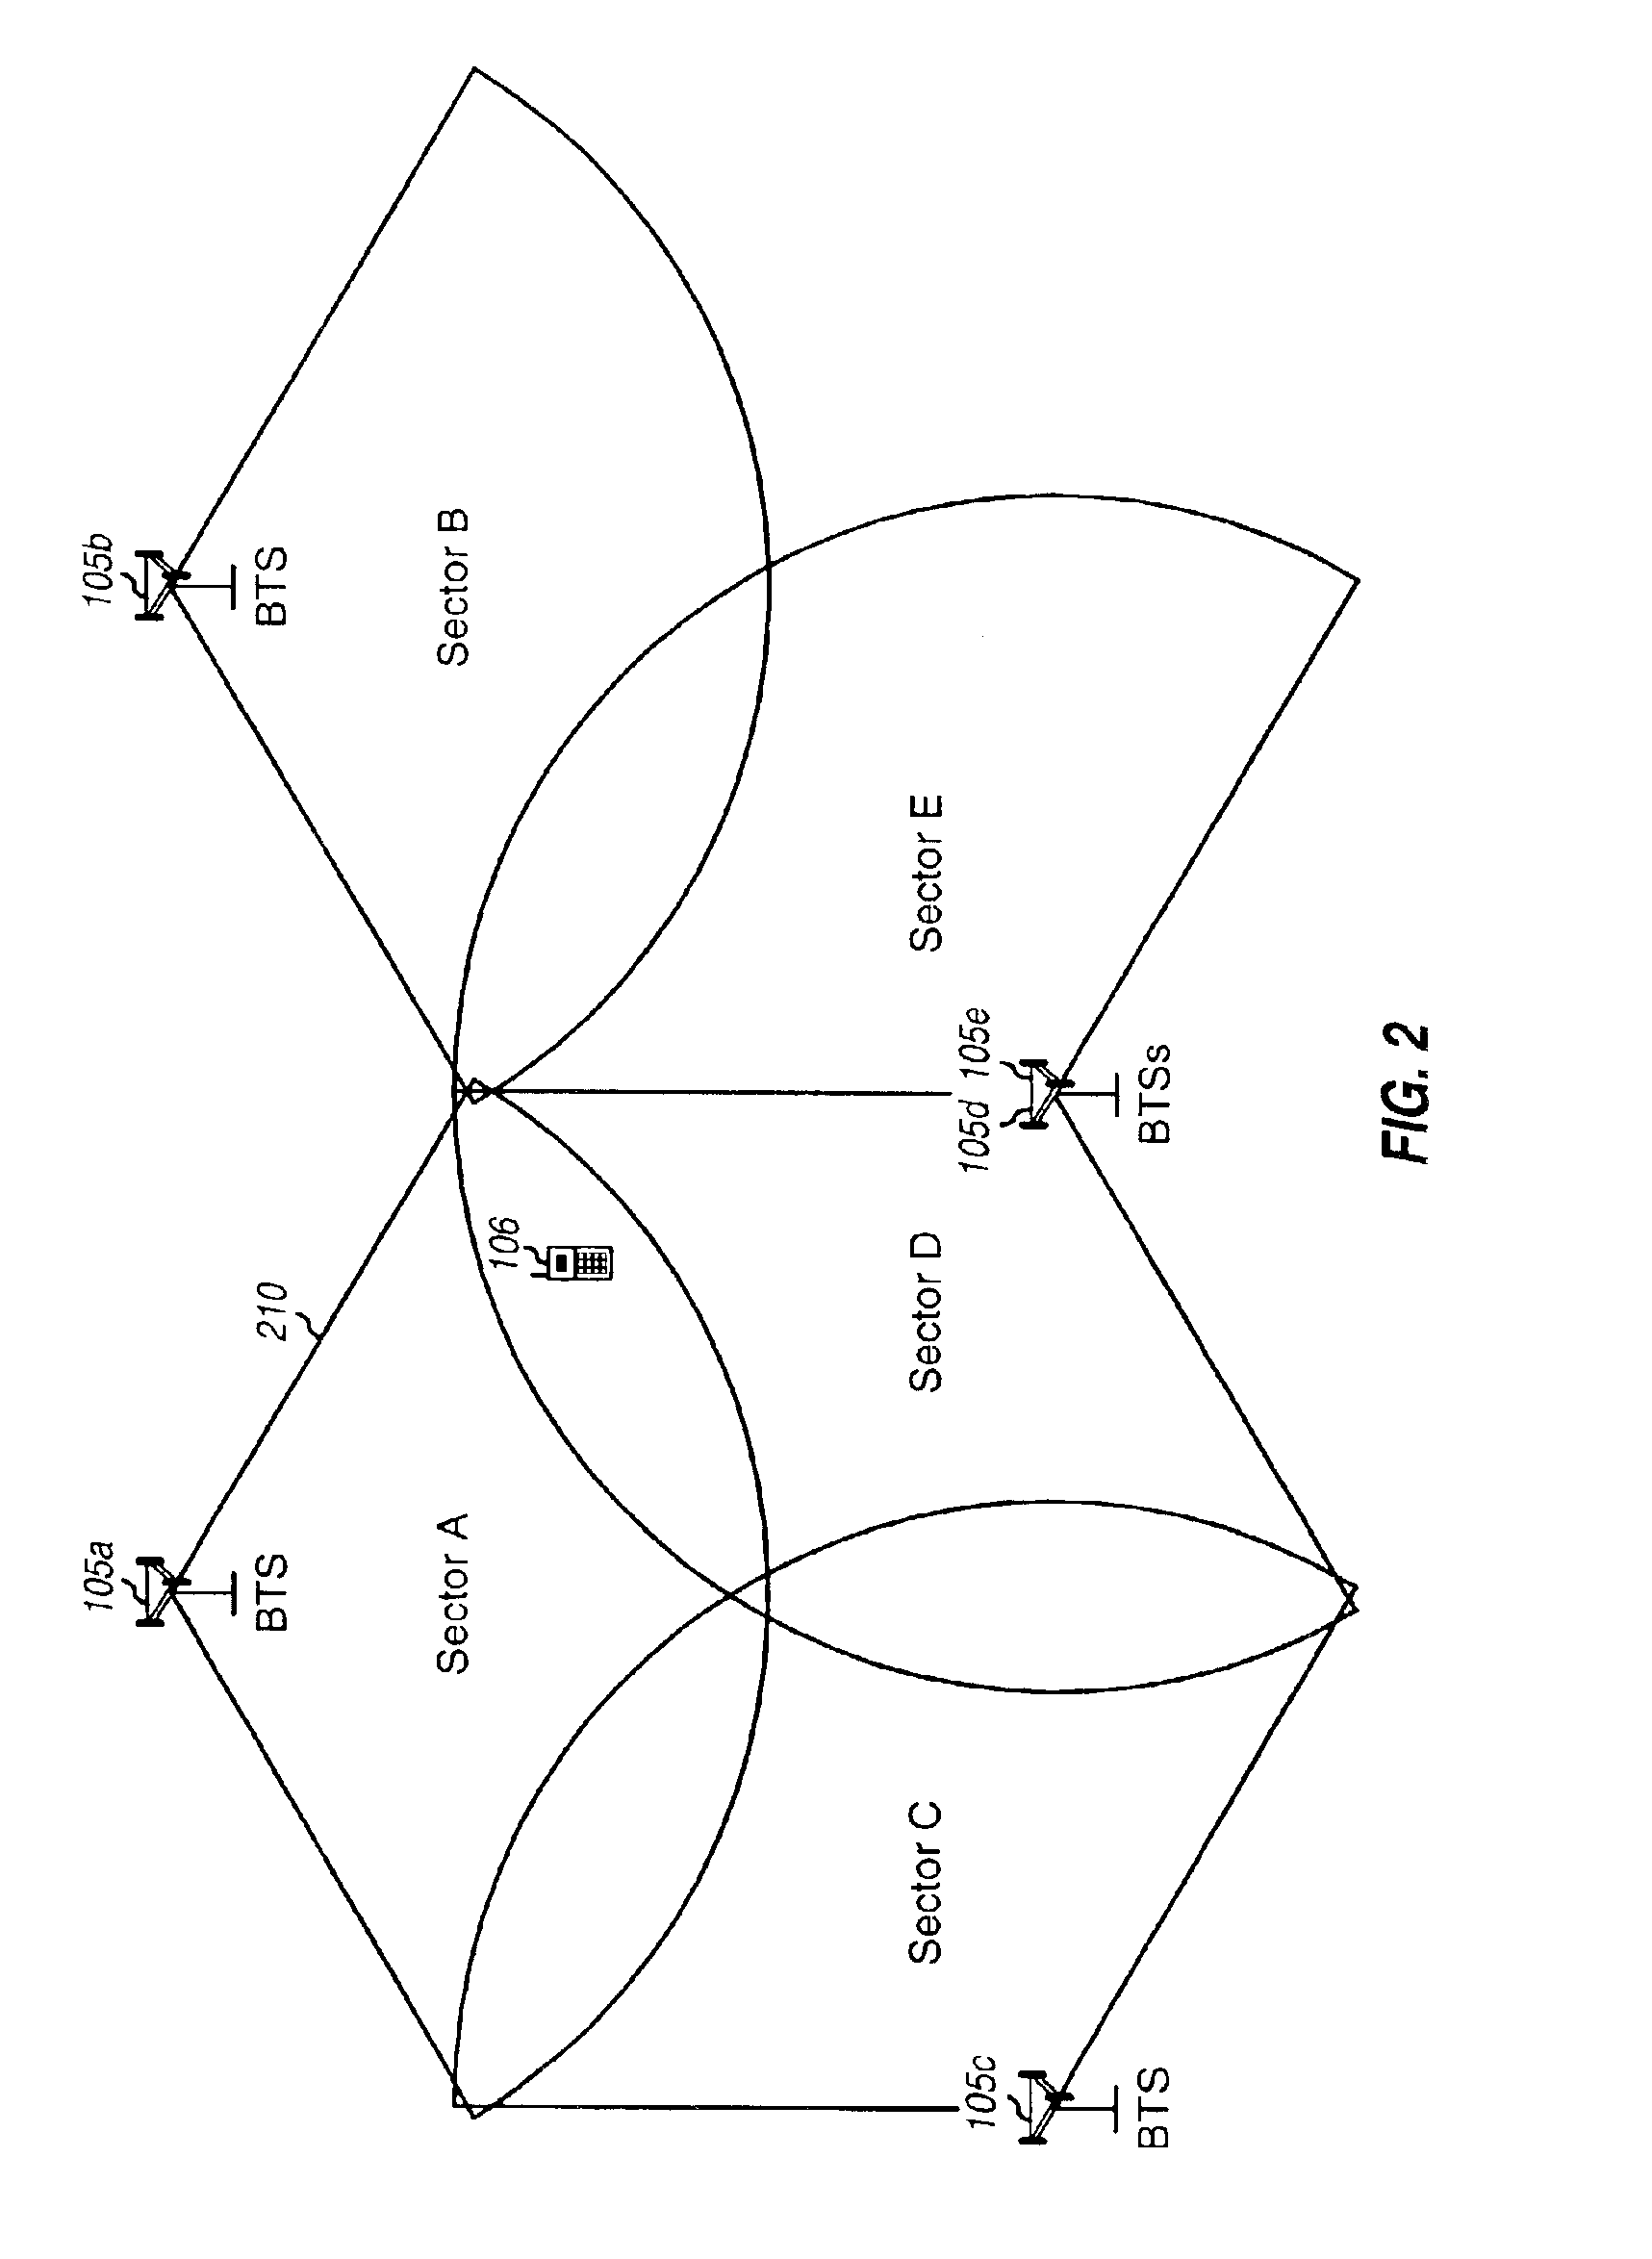 Area based position determination for terminals in a wireless network